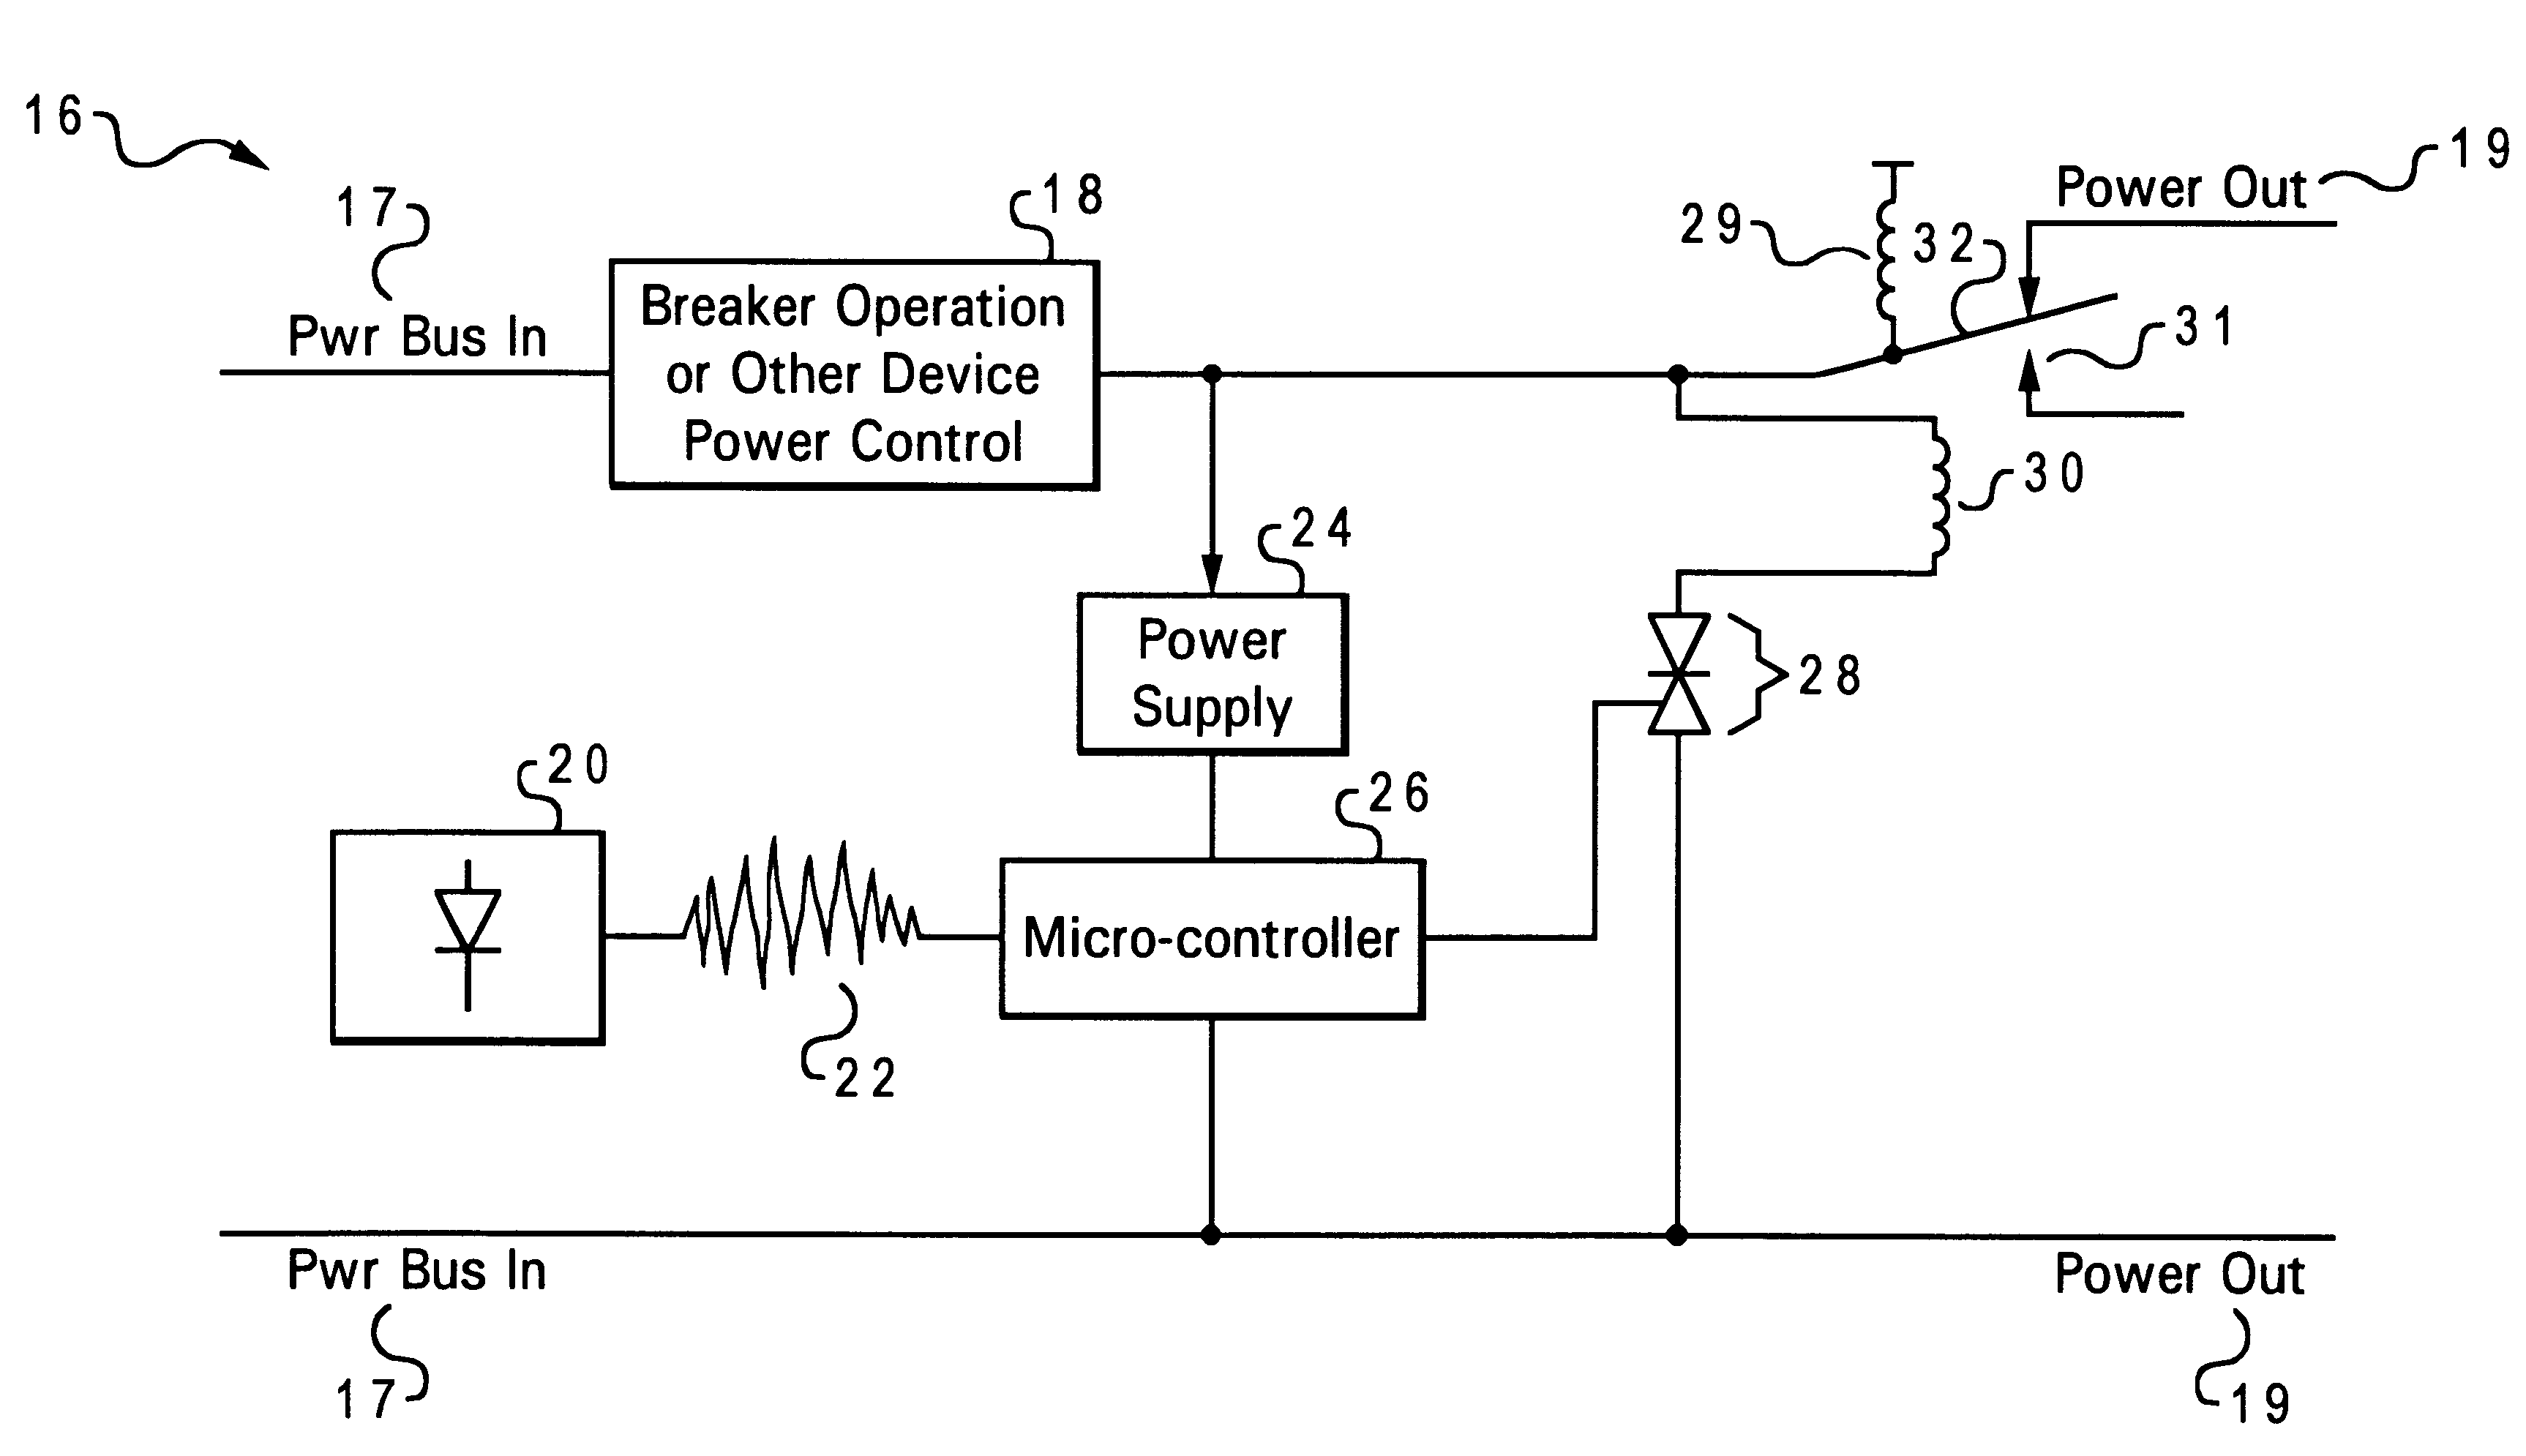 Load balancing and distributing switch-on control for a circuit breaker, an appliance, a device, or an apparatus